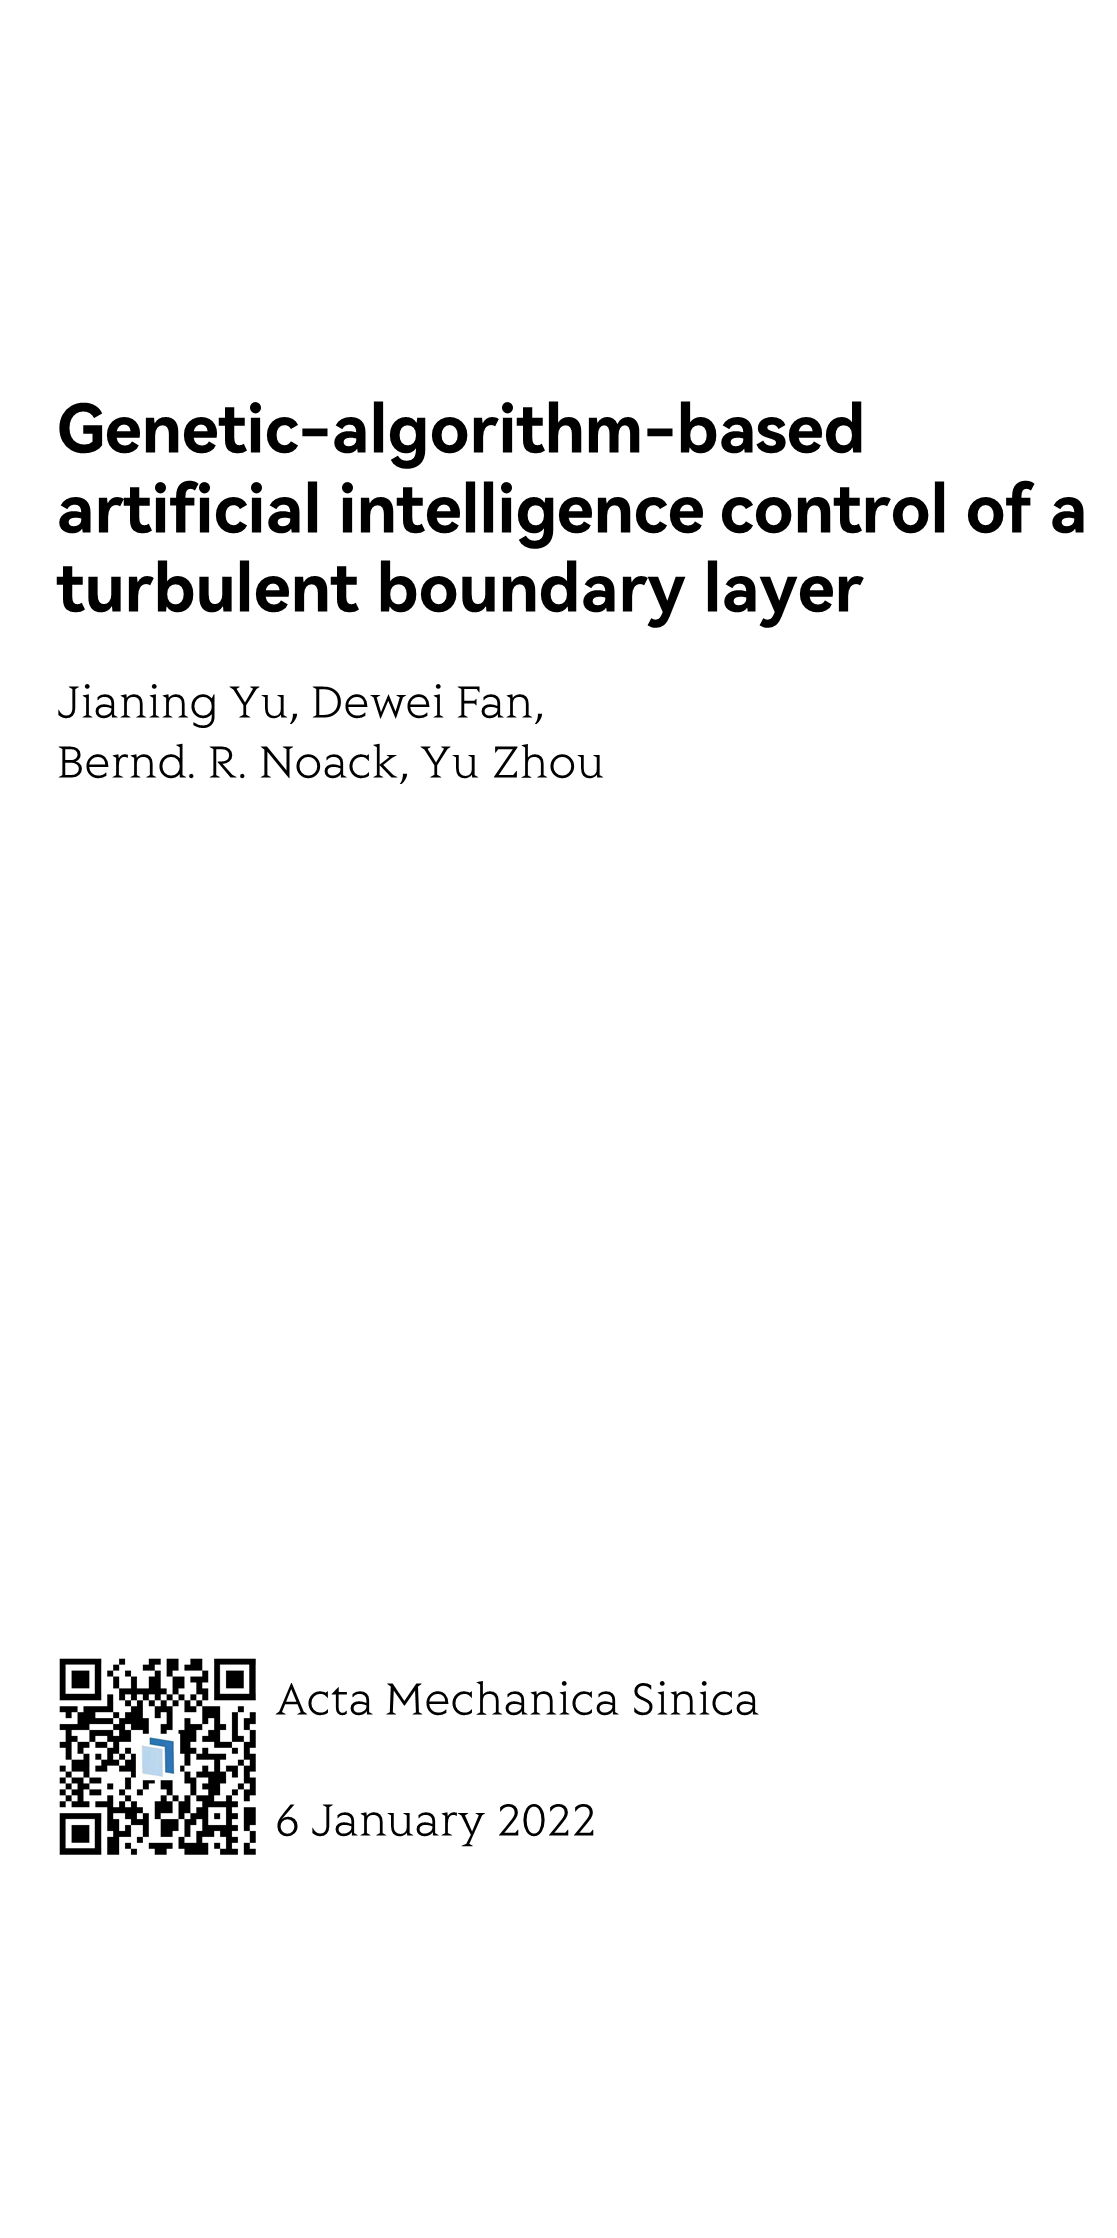 Genetic-algorithm-based artificial intelligence control of a turbulent boundary layer_1